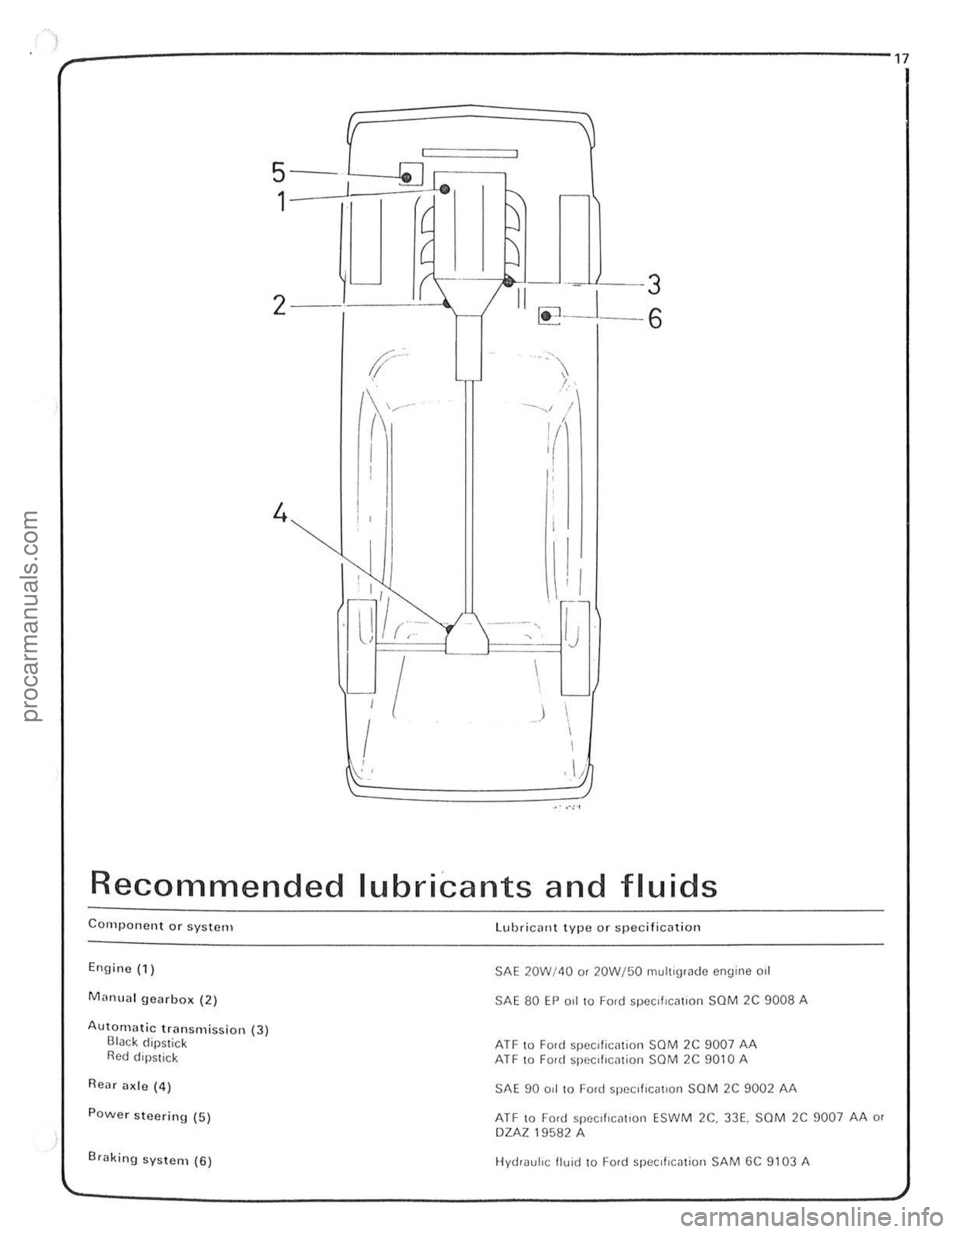 FORD CAPRI 1974 User Guide .-
7 
__ ----------------------------------------------------------17 
5 -
--
C ~ 
1 J
U 
i( 8 
2 --I-~.'-"'\r__ / II [!CJ.:=J-~ 
-.... ,I / 
i( 
• • 
Recommended lubricants and fluids